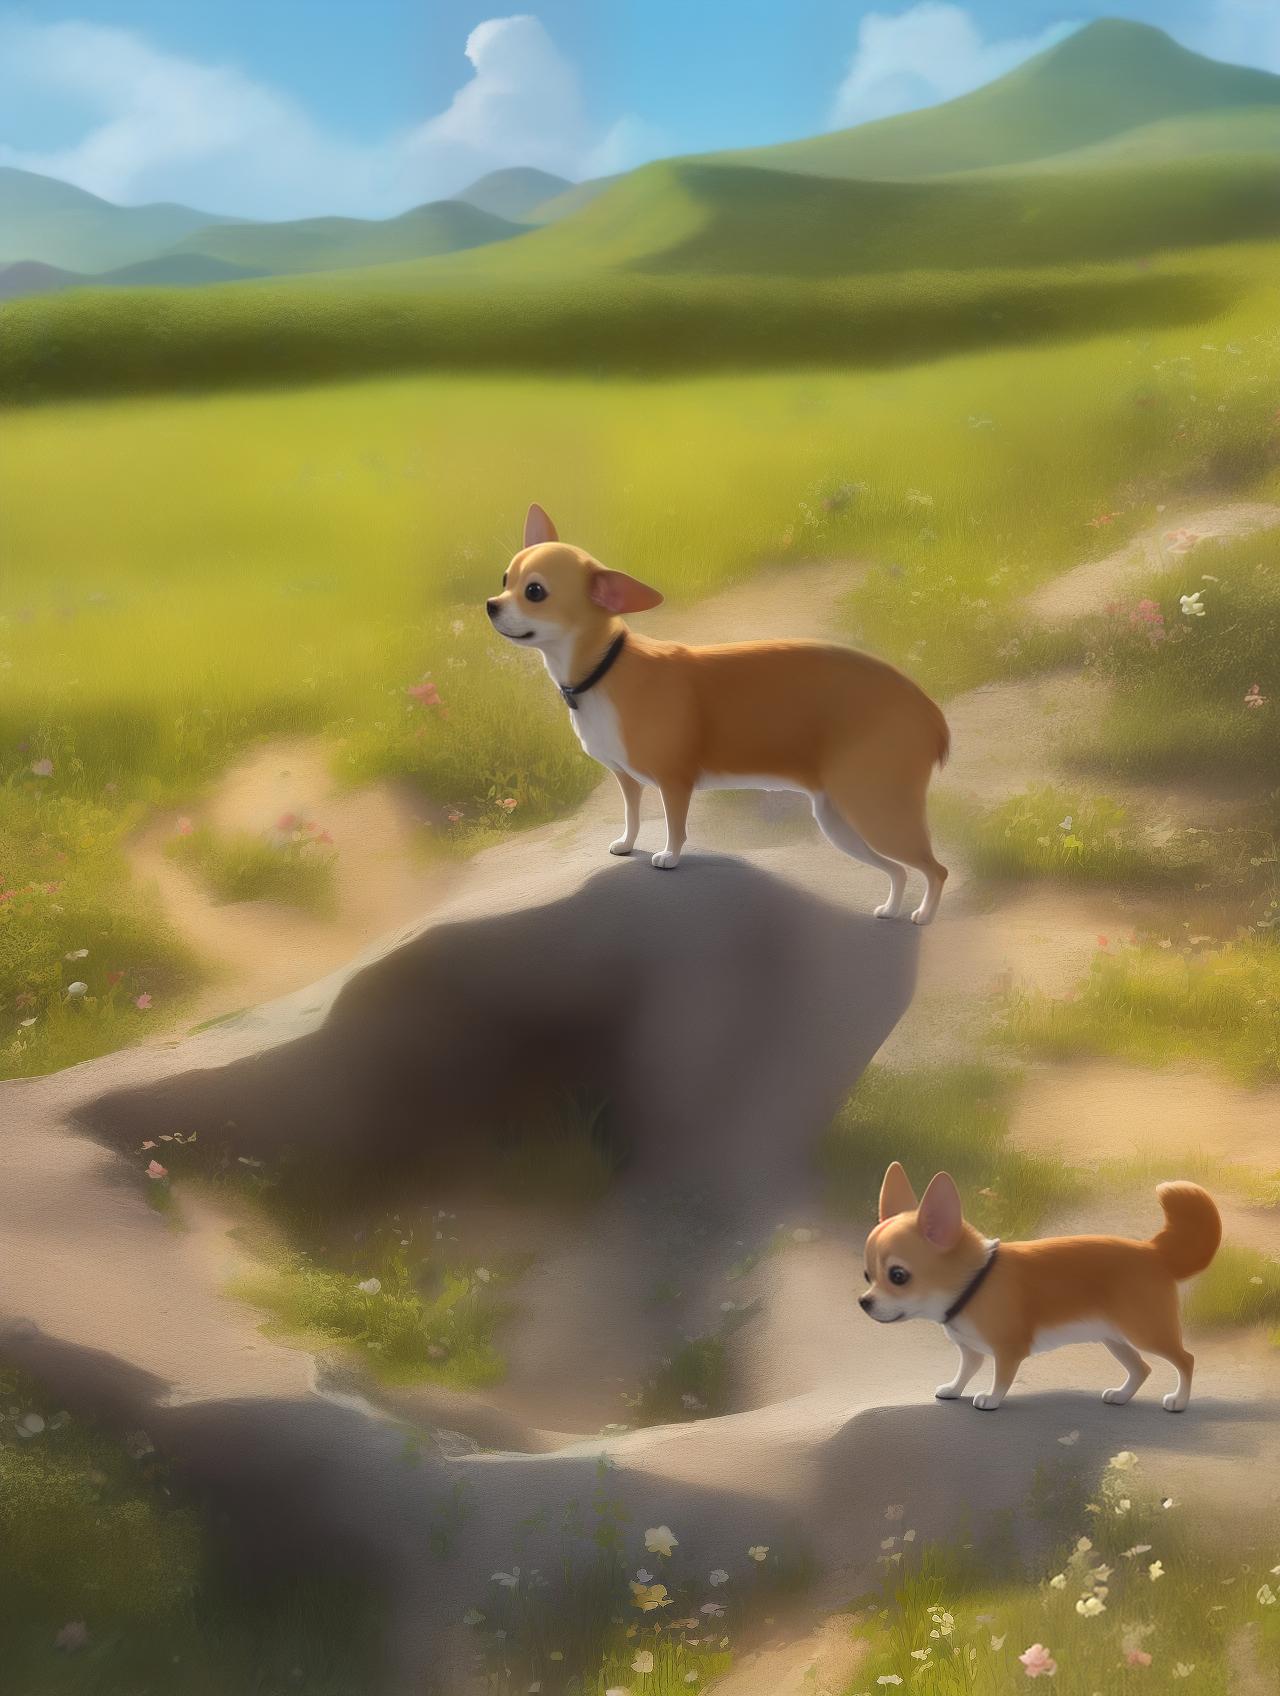  masterpiece, best quality, (fidelity:1.4), best quality, masterpiece, ultra high resolution, poster, Pixar animation style, 1080p resolution, a chihuahua, chihuahua, animation style, Pixar animation style.